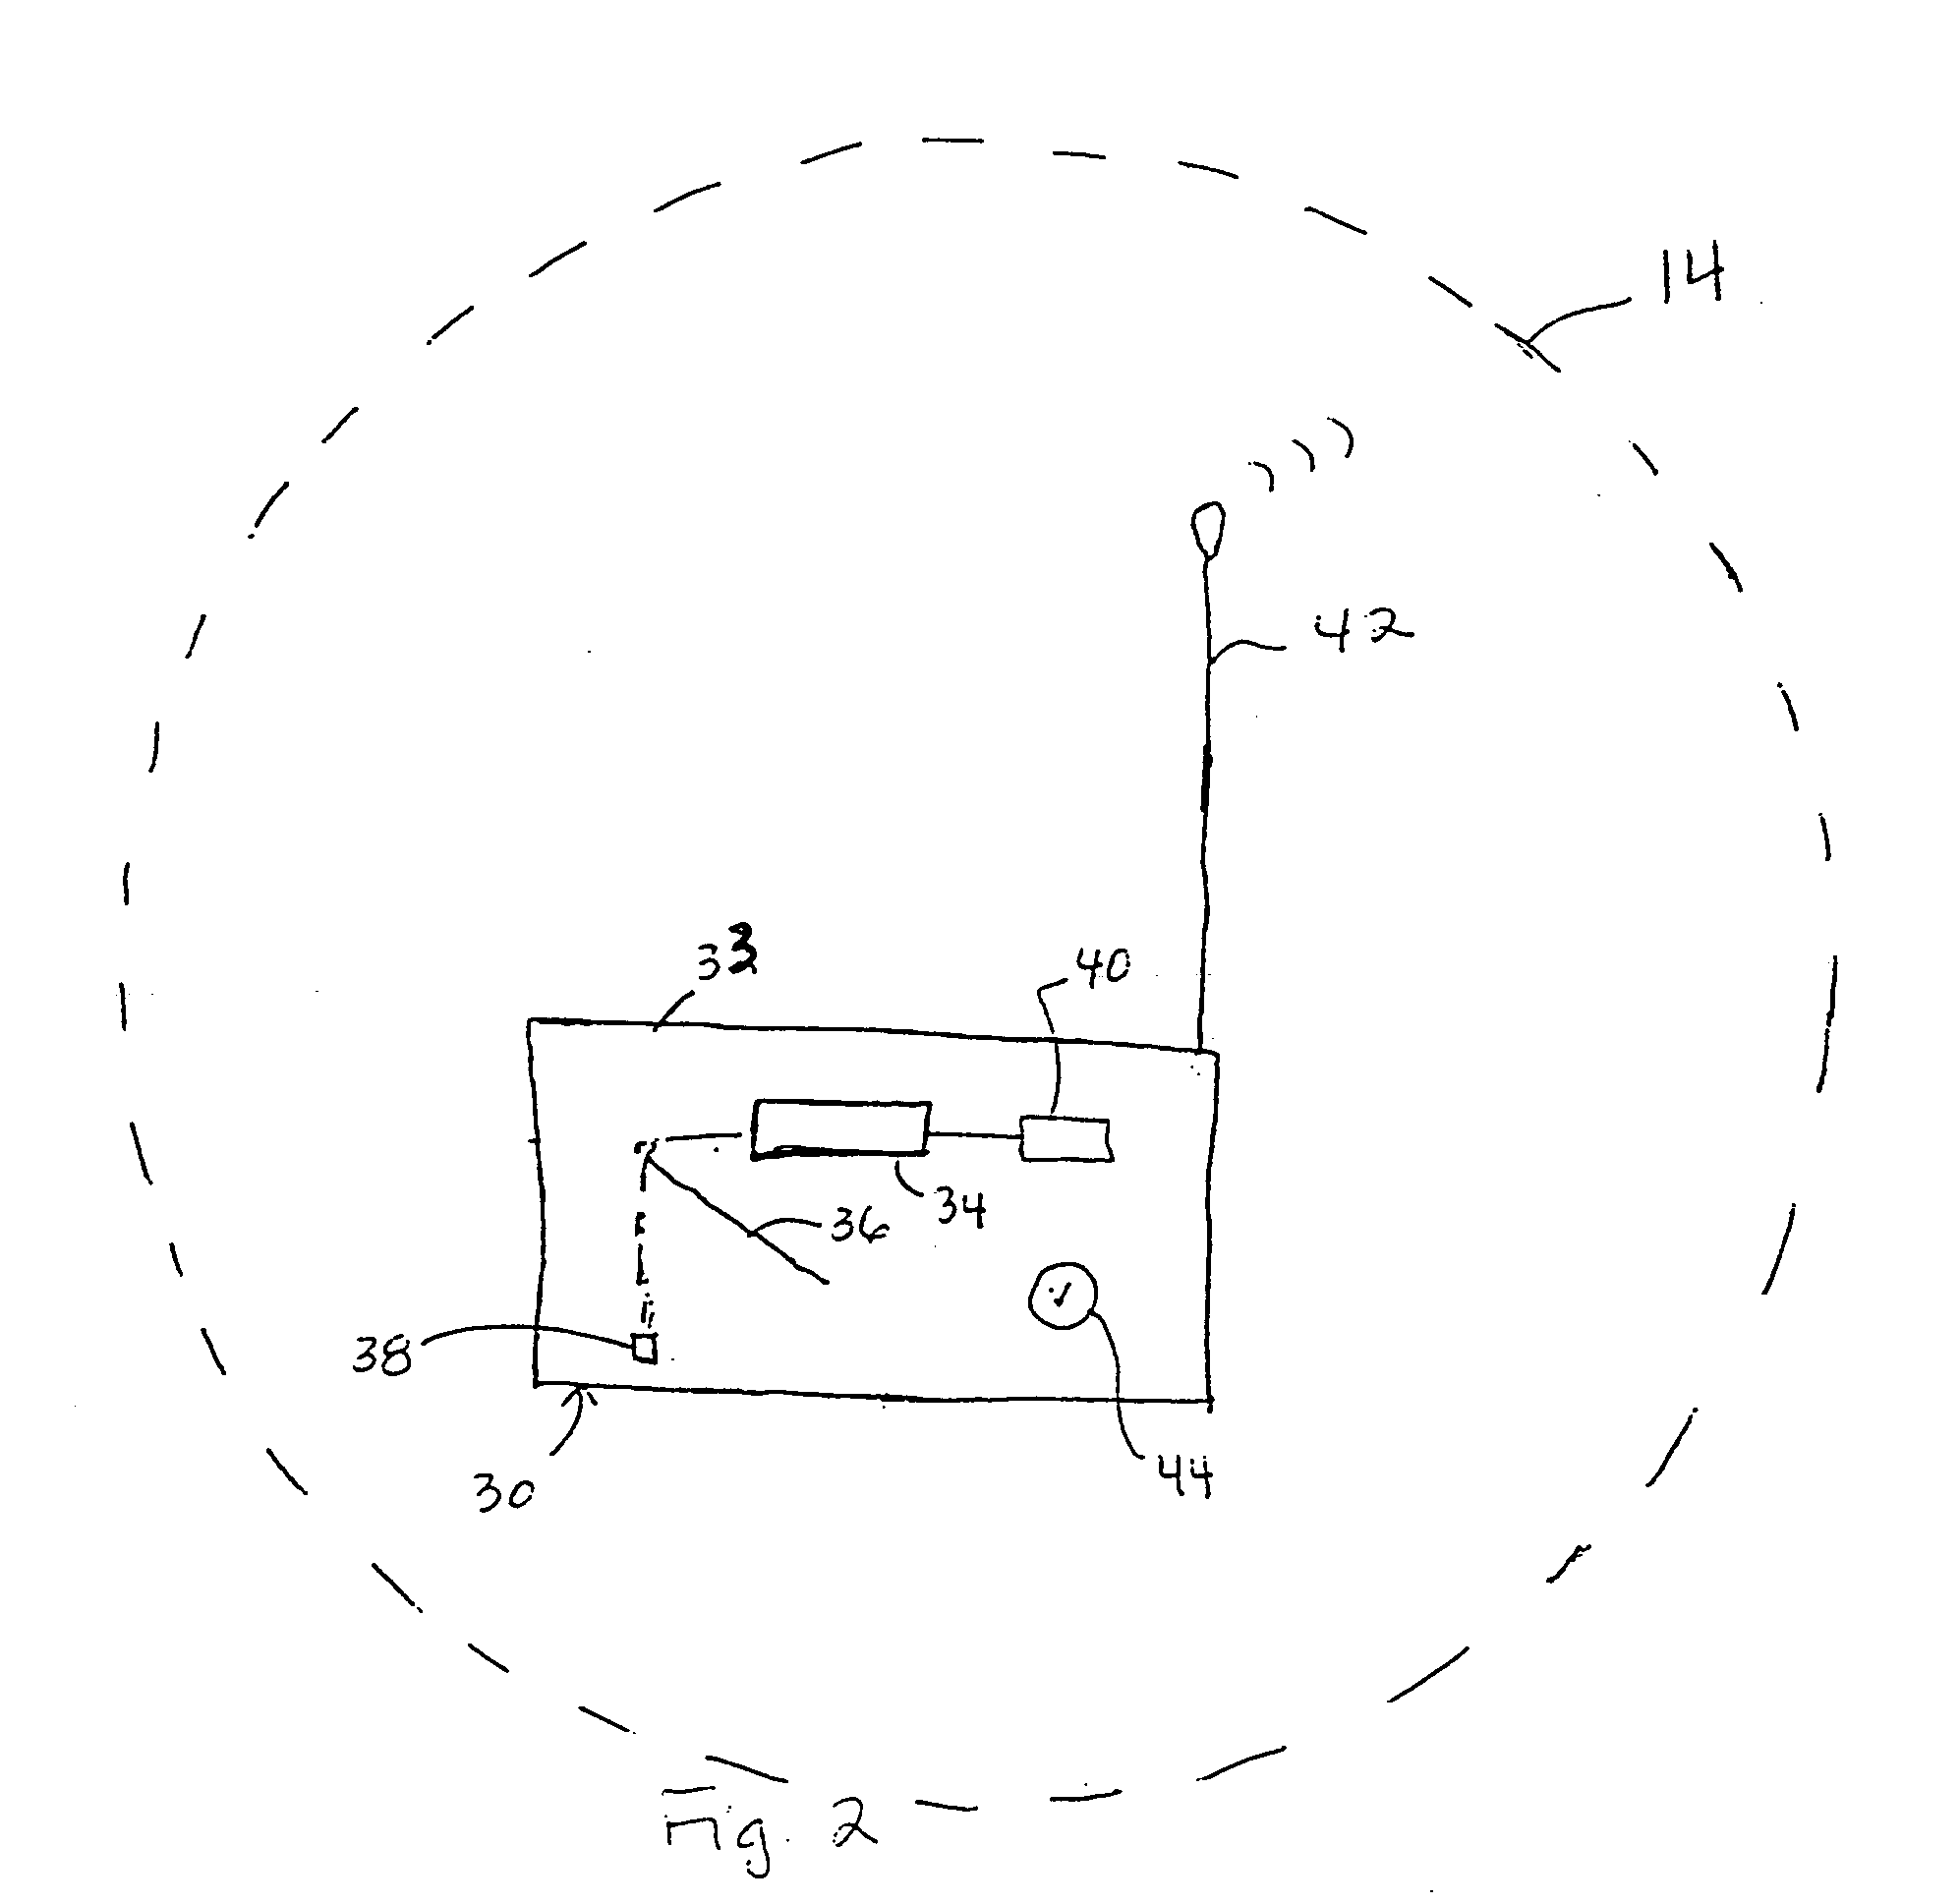 Detection device for air filter